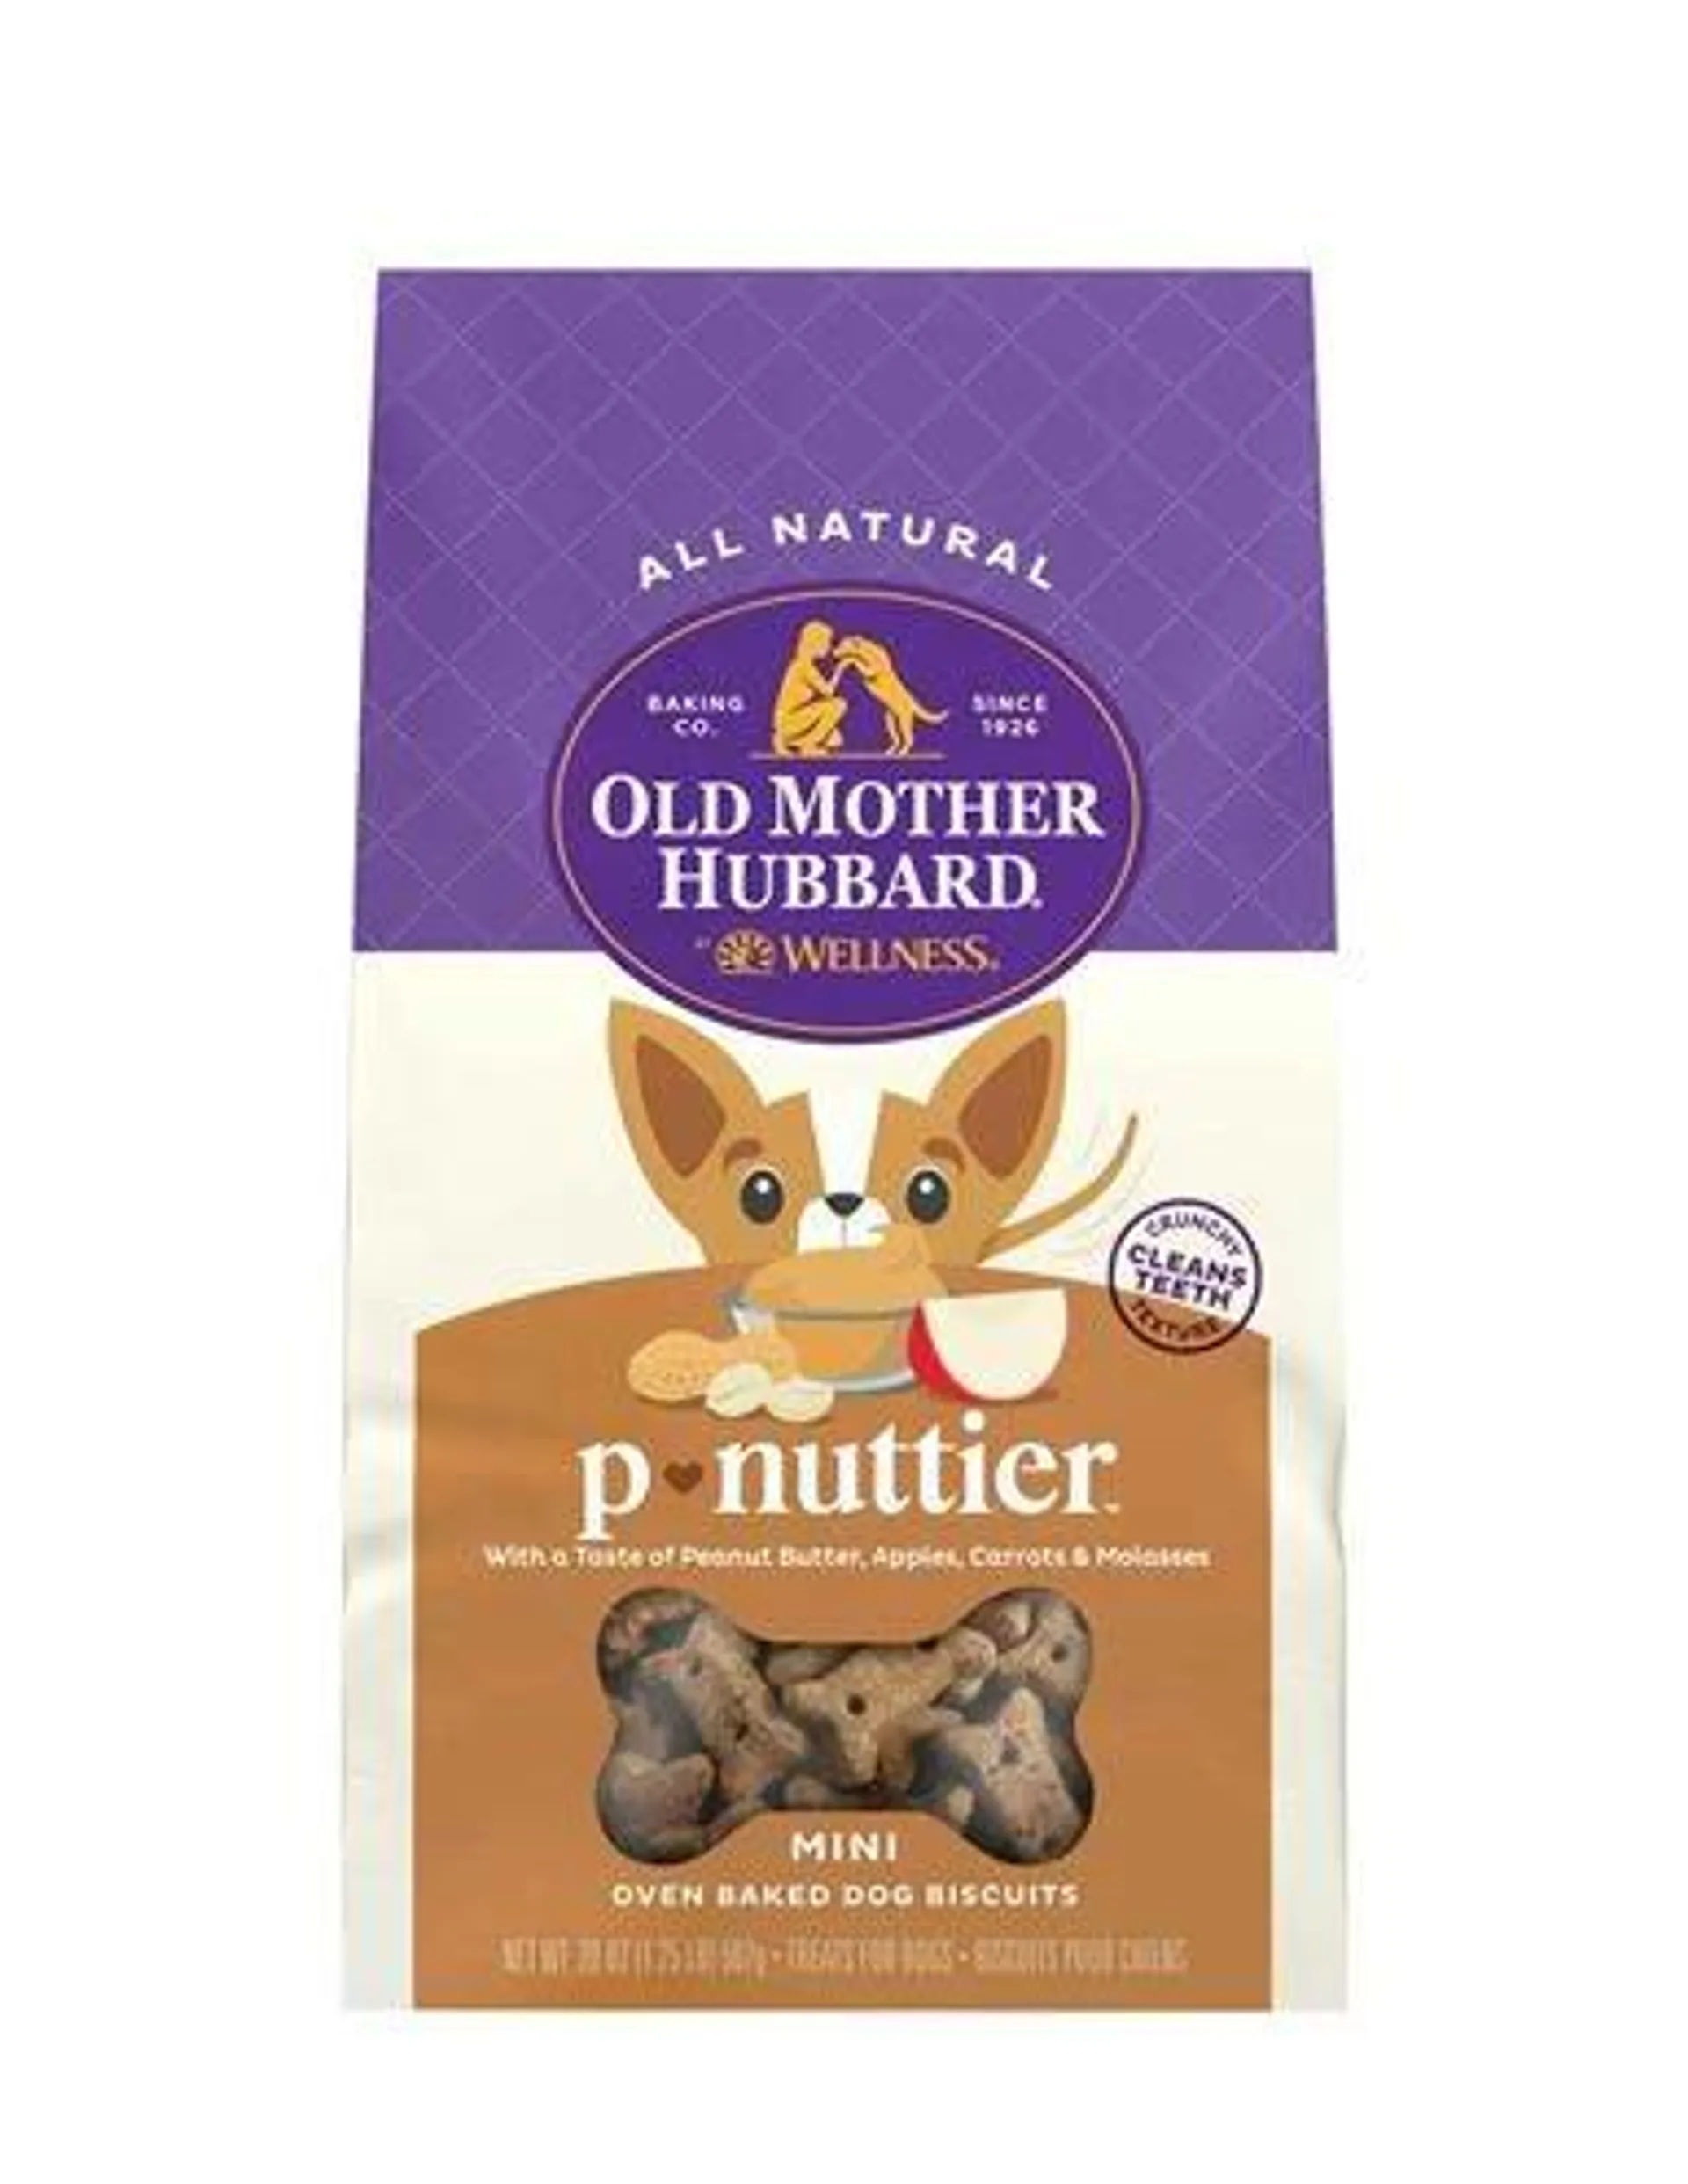 Old Mother Hubbard by Wellness Classic P-Nuttier Dog Treats, Mini, 20 Ounce Bag